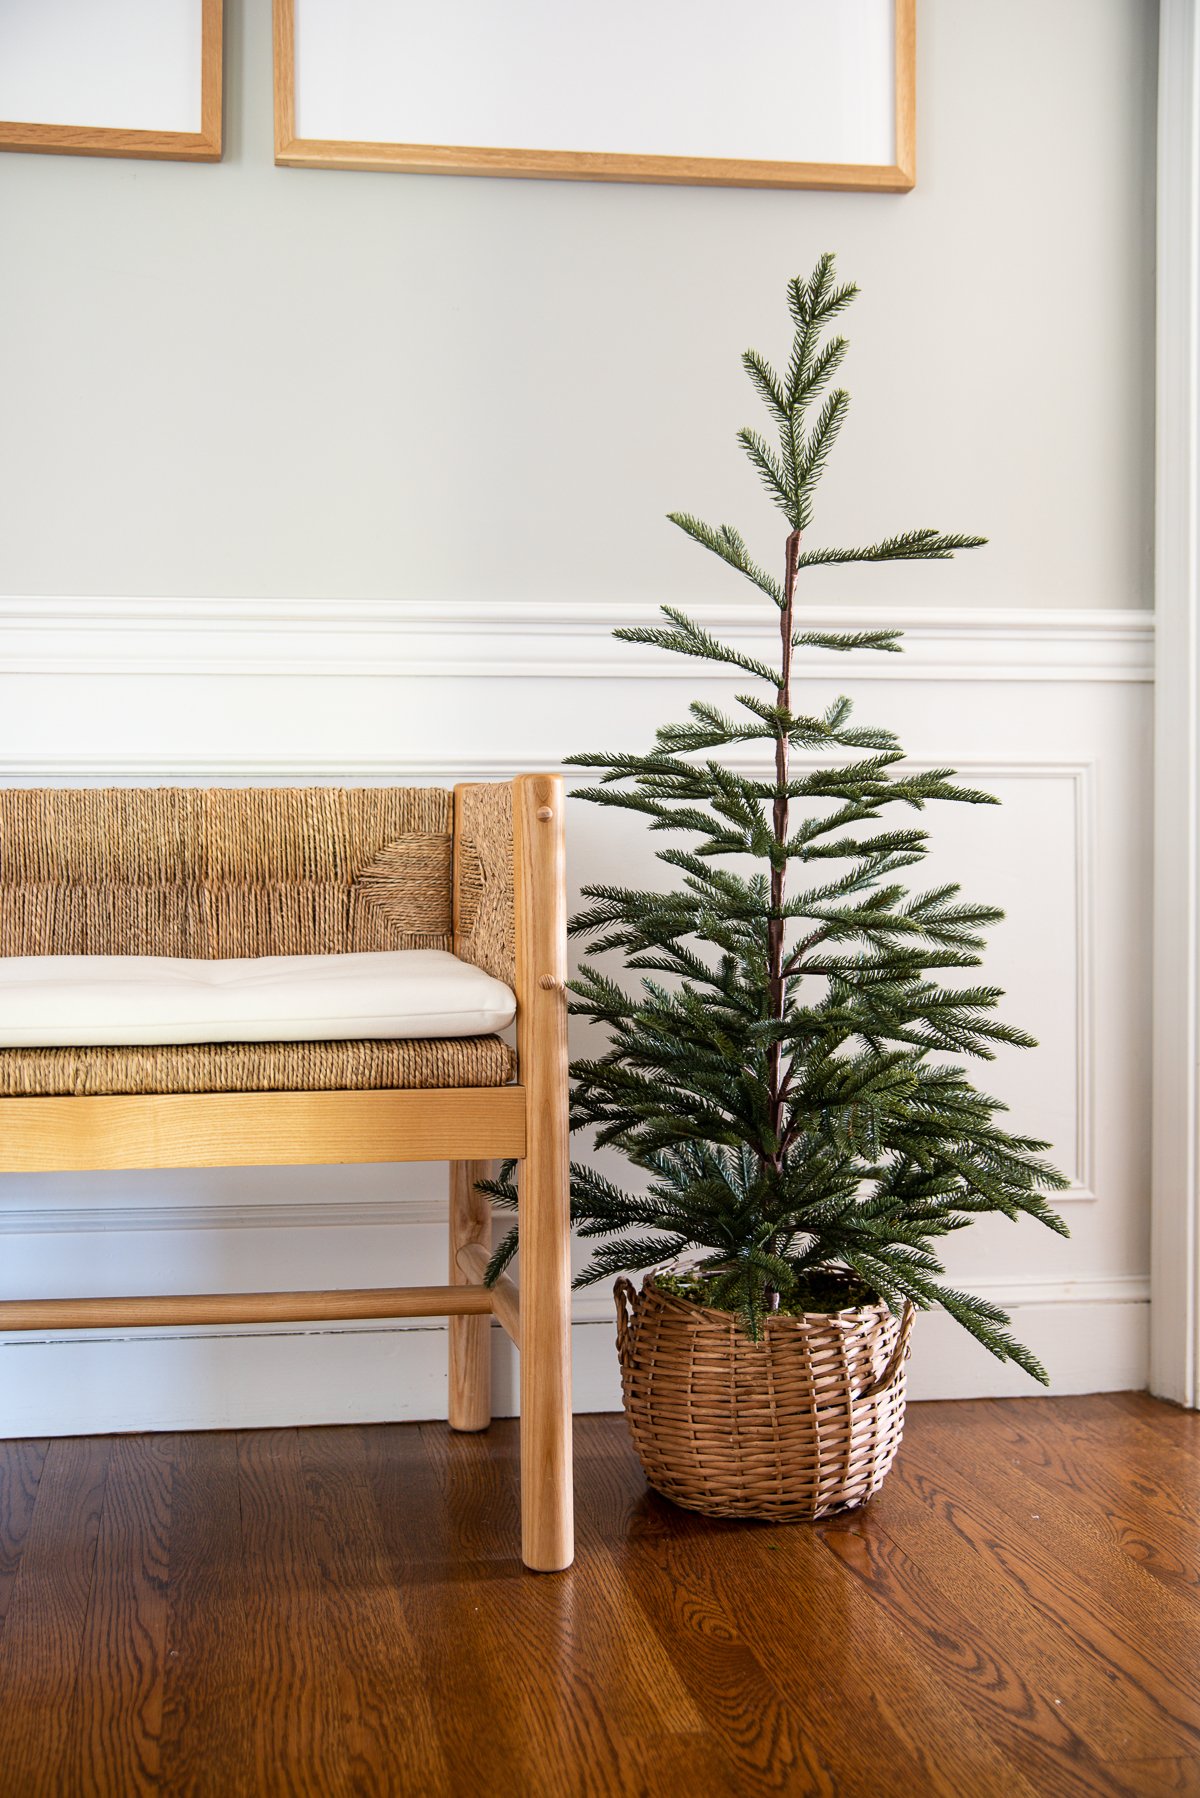 A small tree for Christmas in a woven basket sitting on the floor next to an entryway bench.